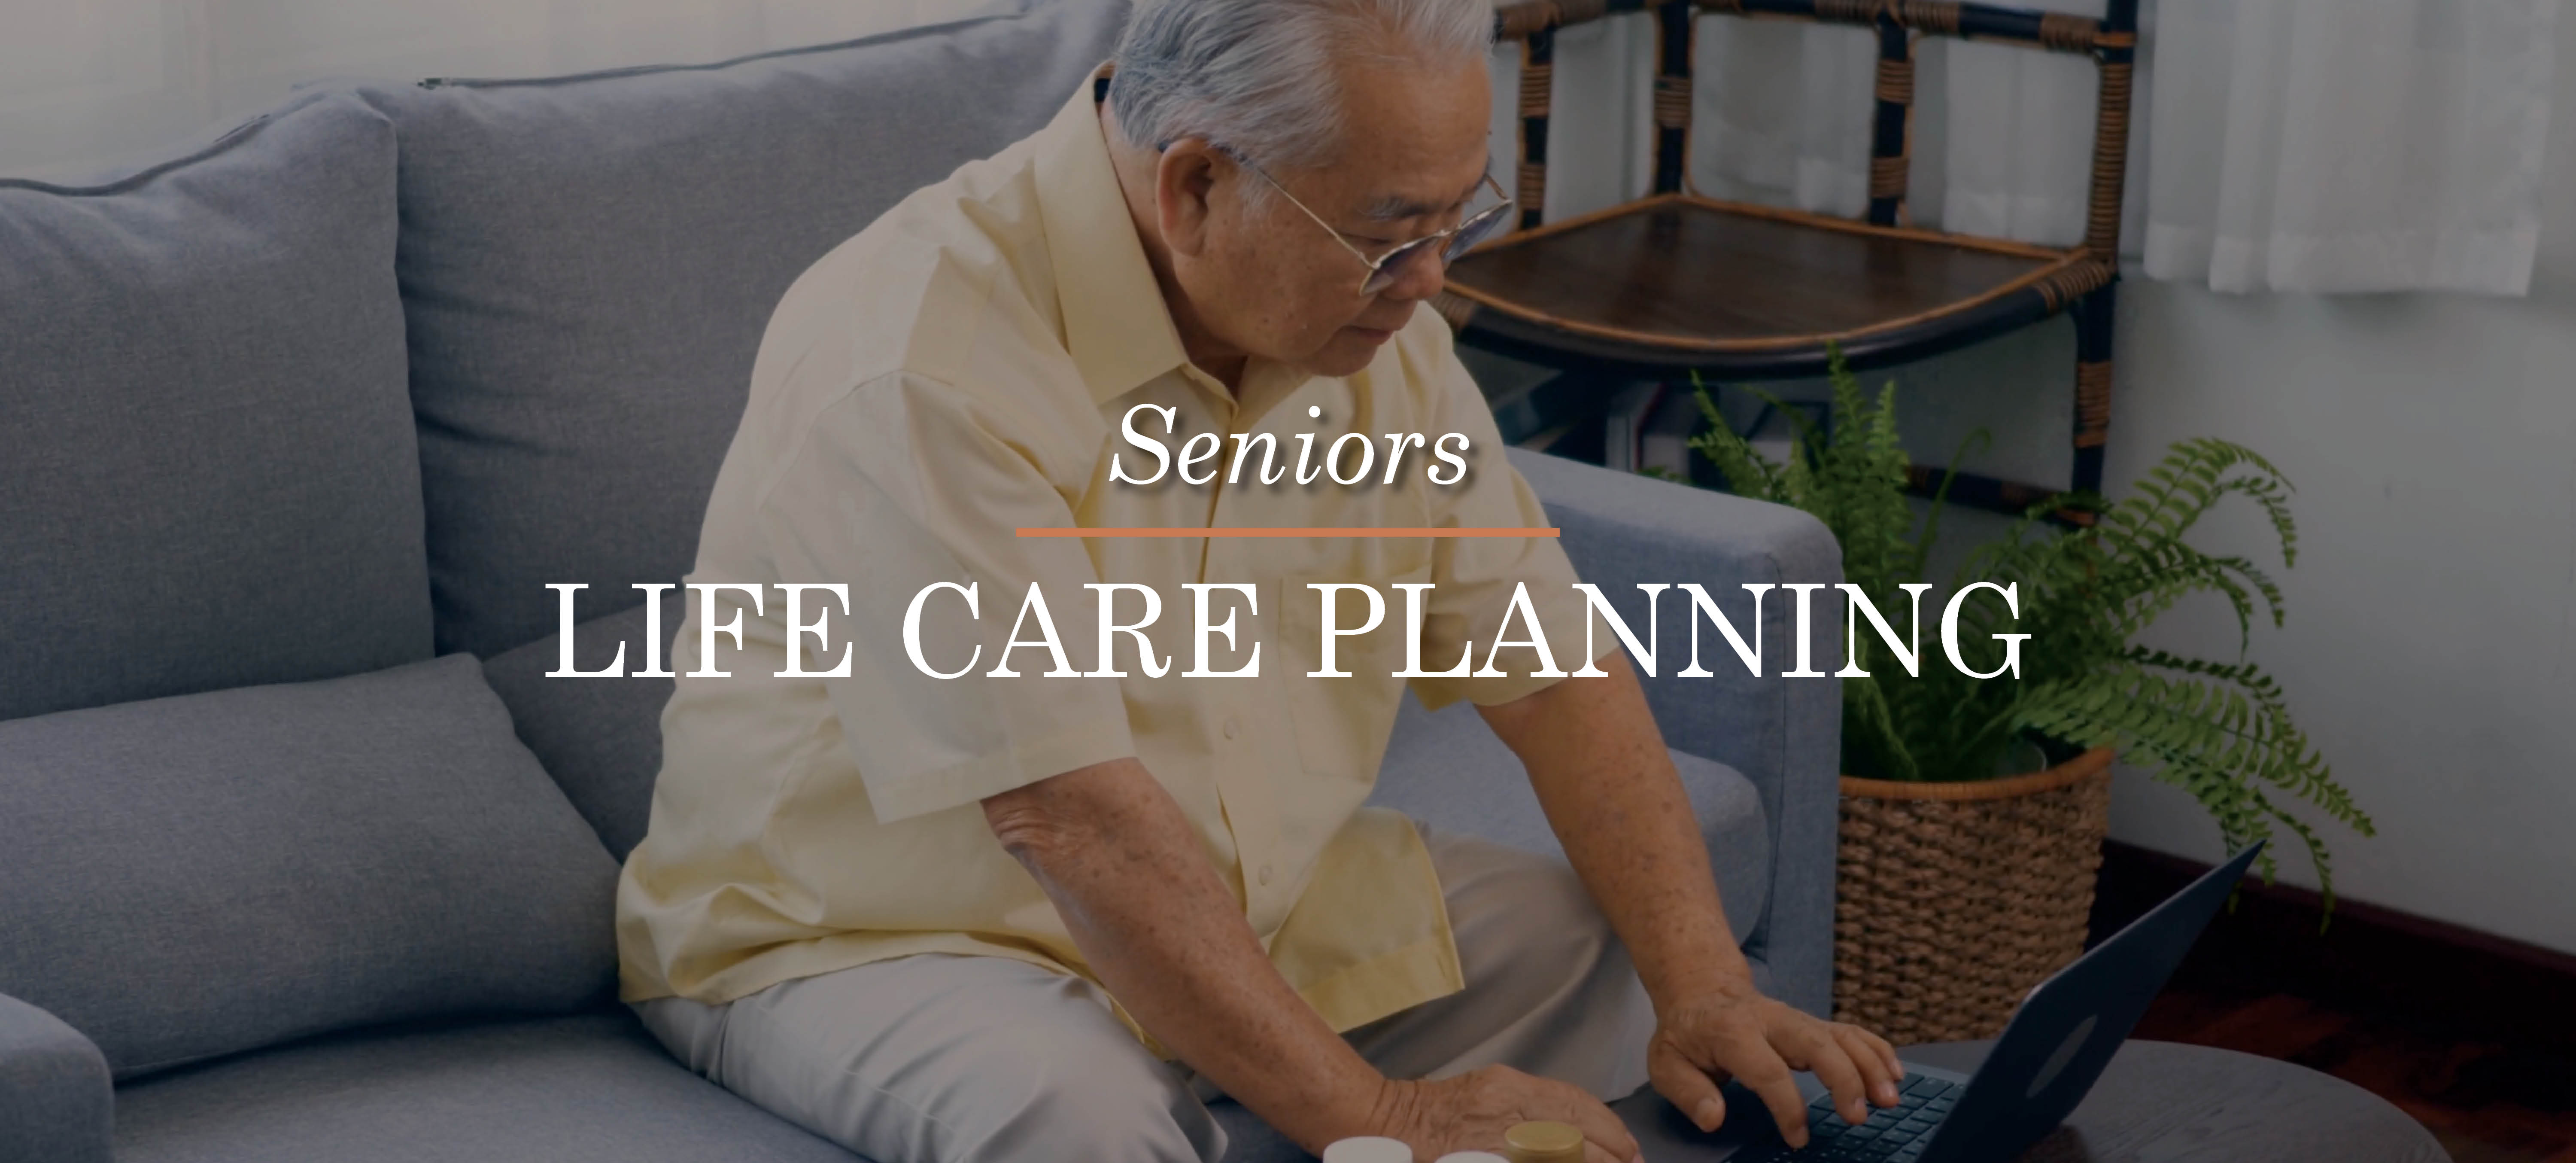 Senior citizen types on computer. Text overlays the image and says "Seniors Life Care Planning"